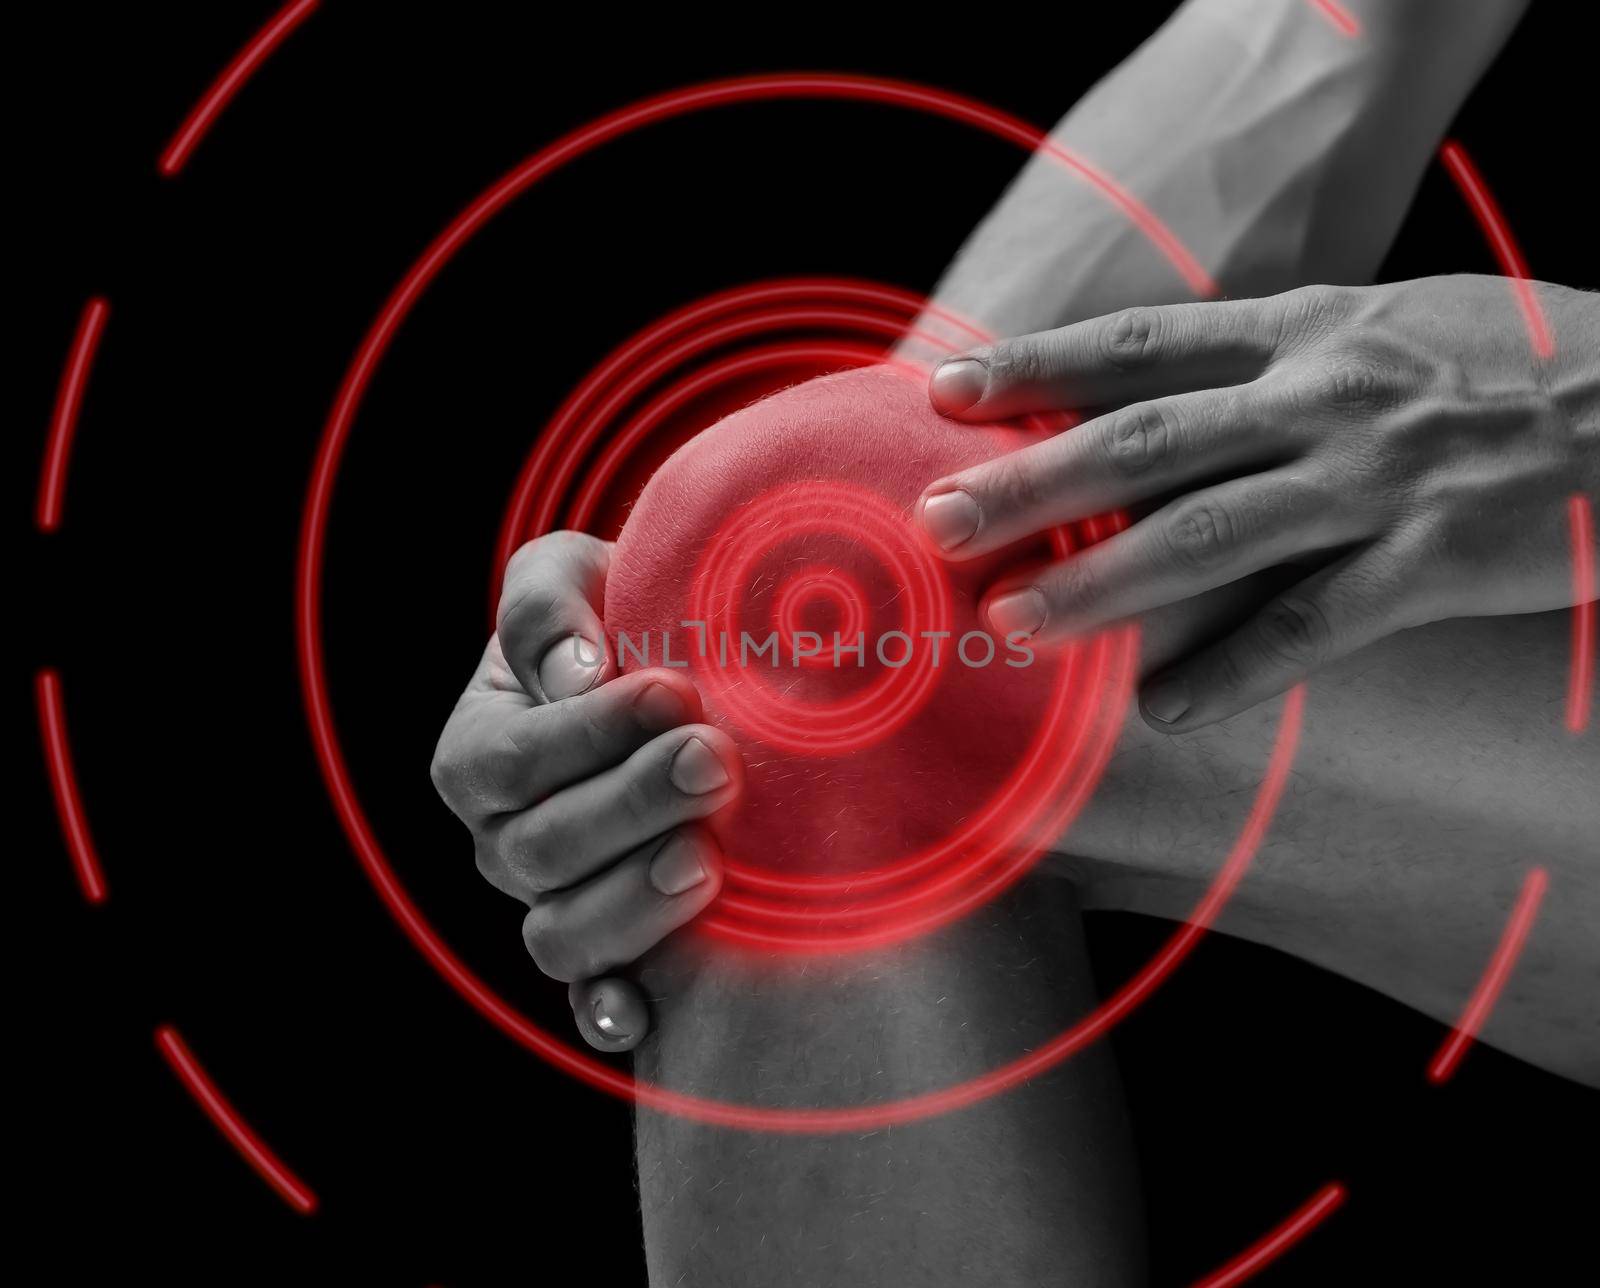 Pain in the male knee joint, pain area of red color